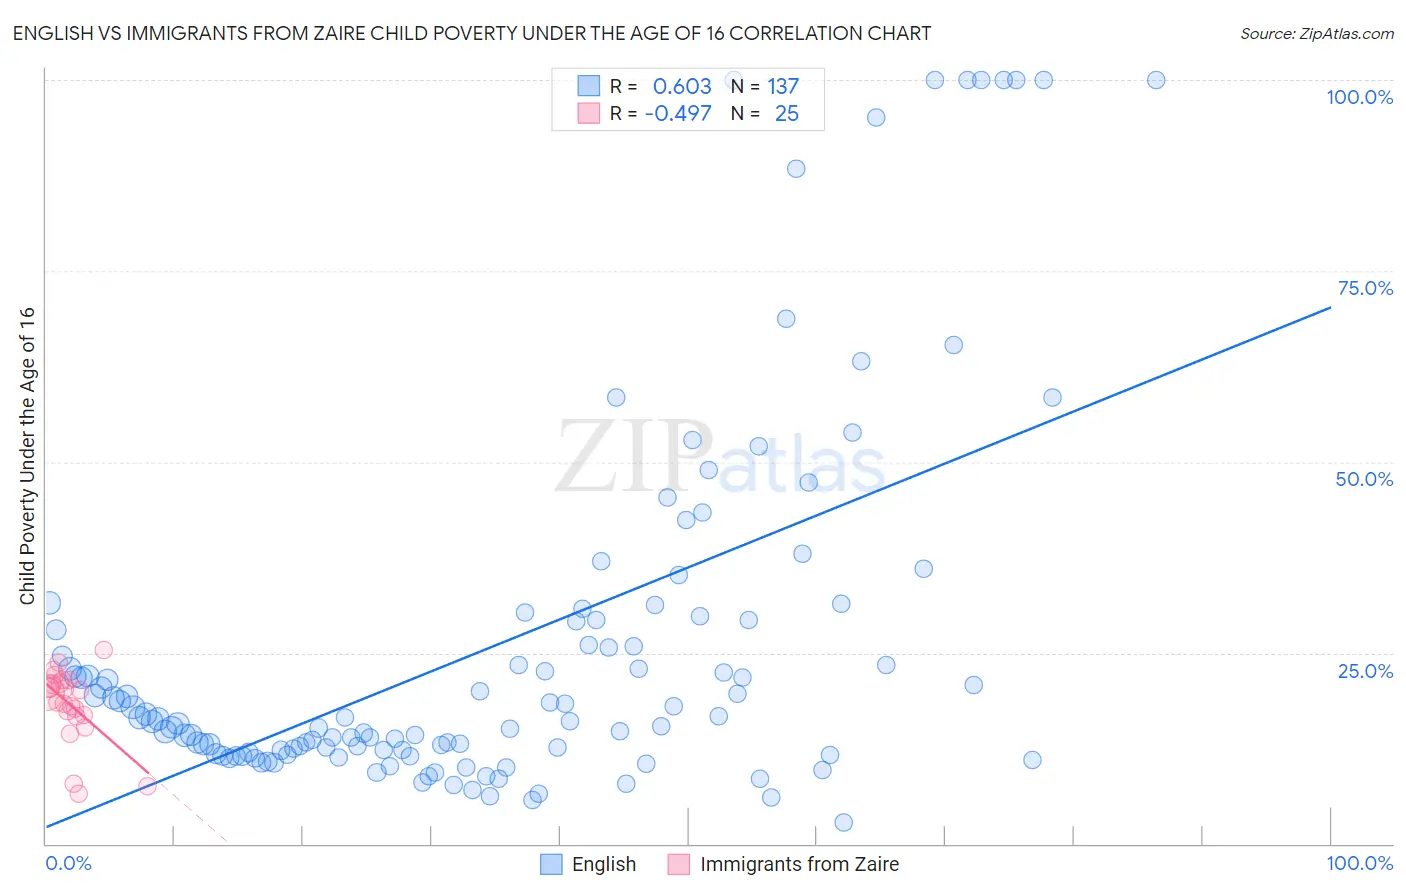 English vs Immigrants from Zaire Child Poverty Under the Age of 16